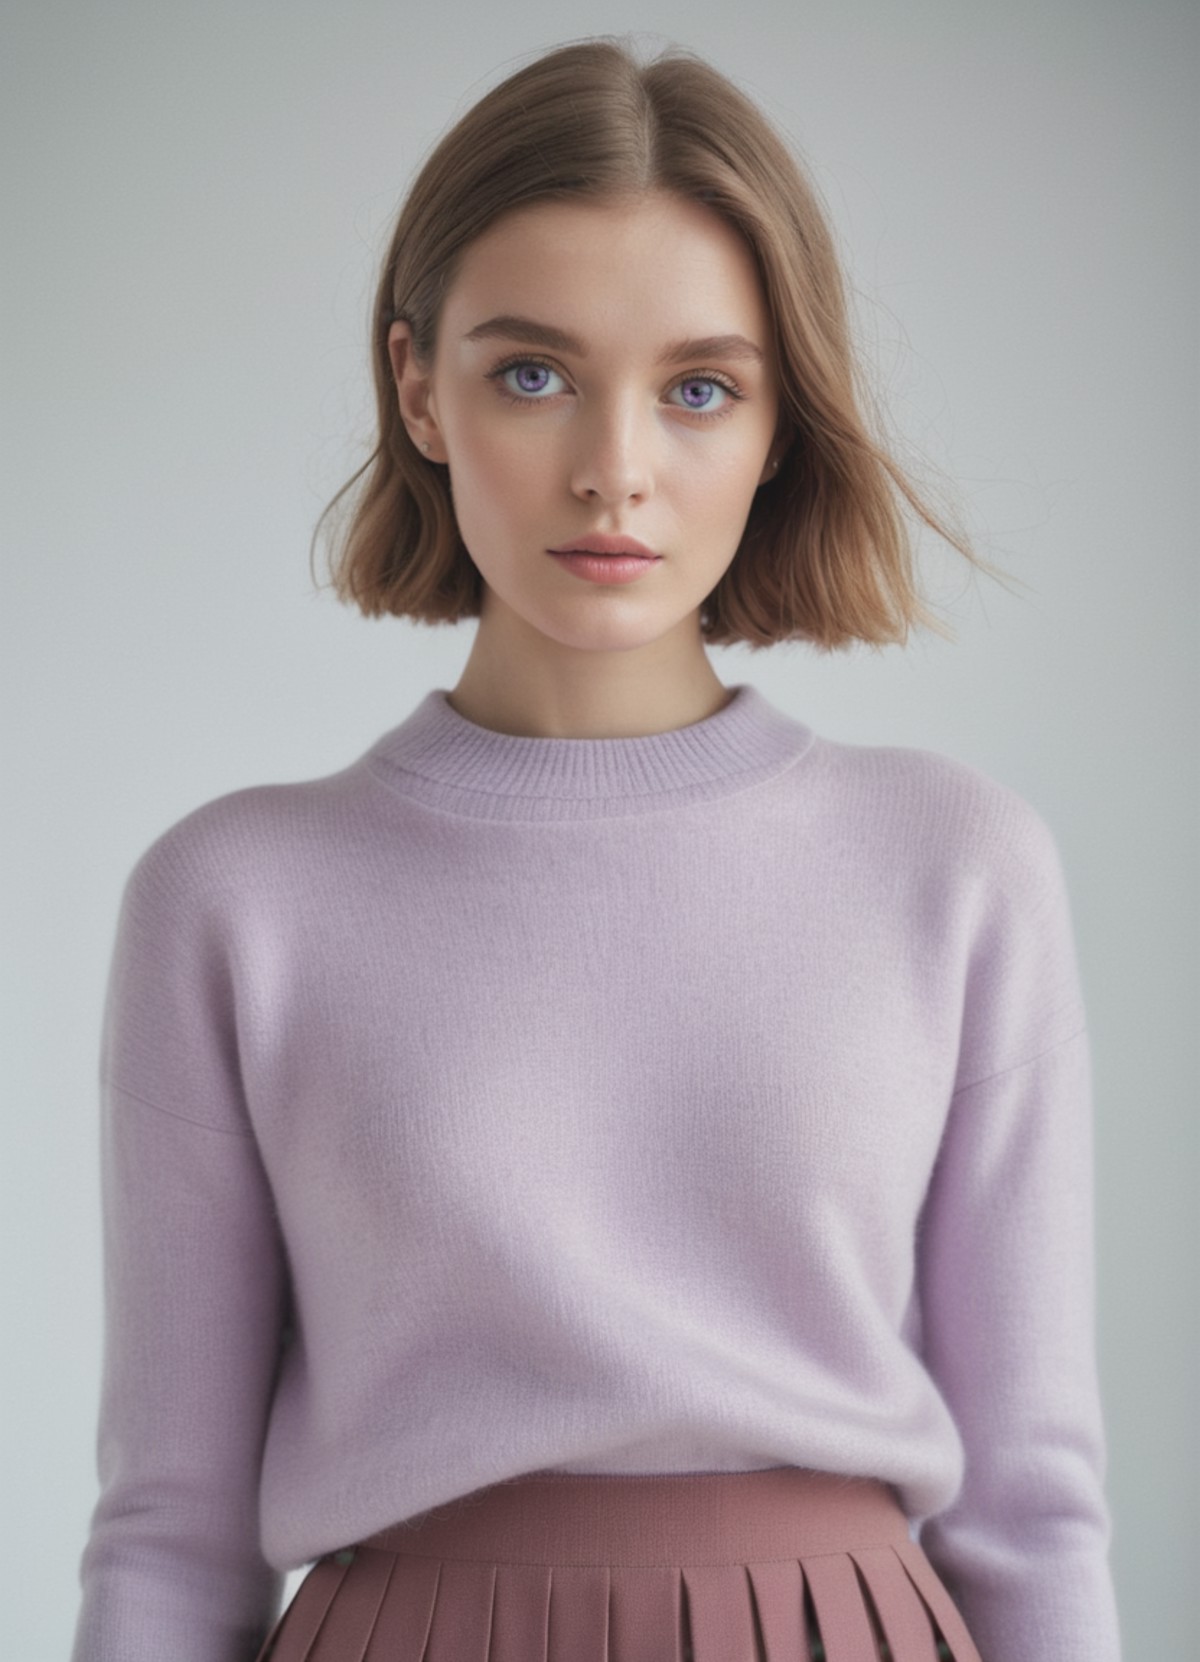 high quality fashion editorial, wearing a set of a sweater and a skirt, soft merino knit material in light purple, looking...